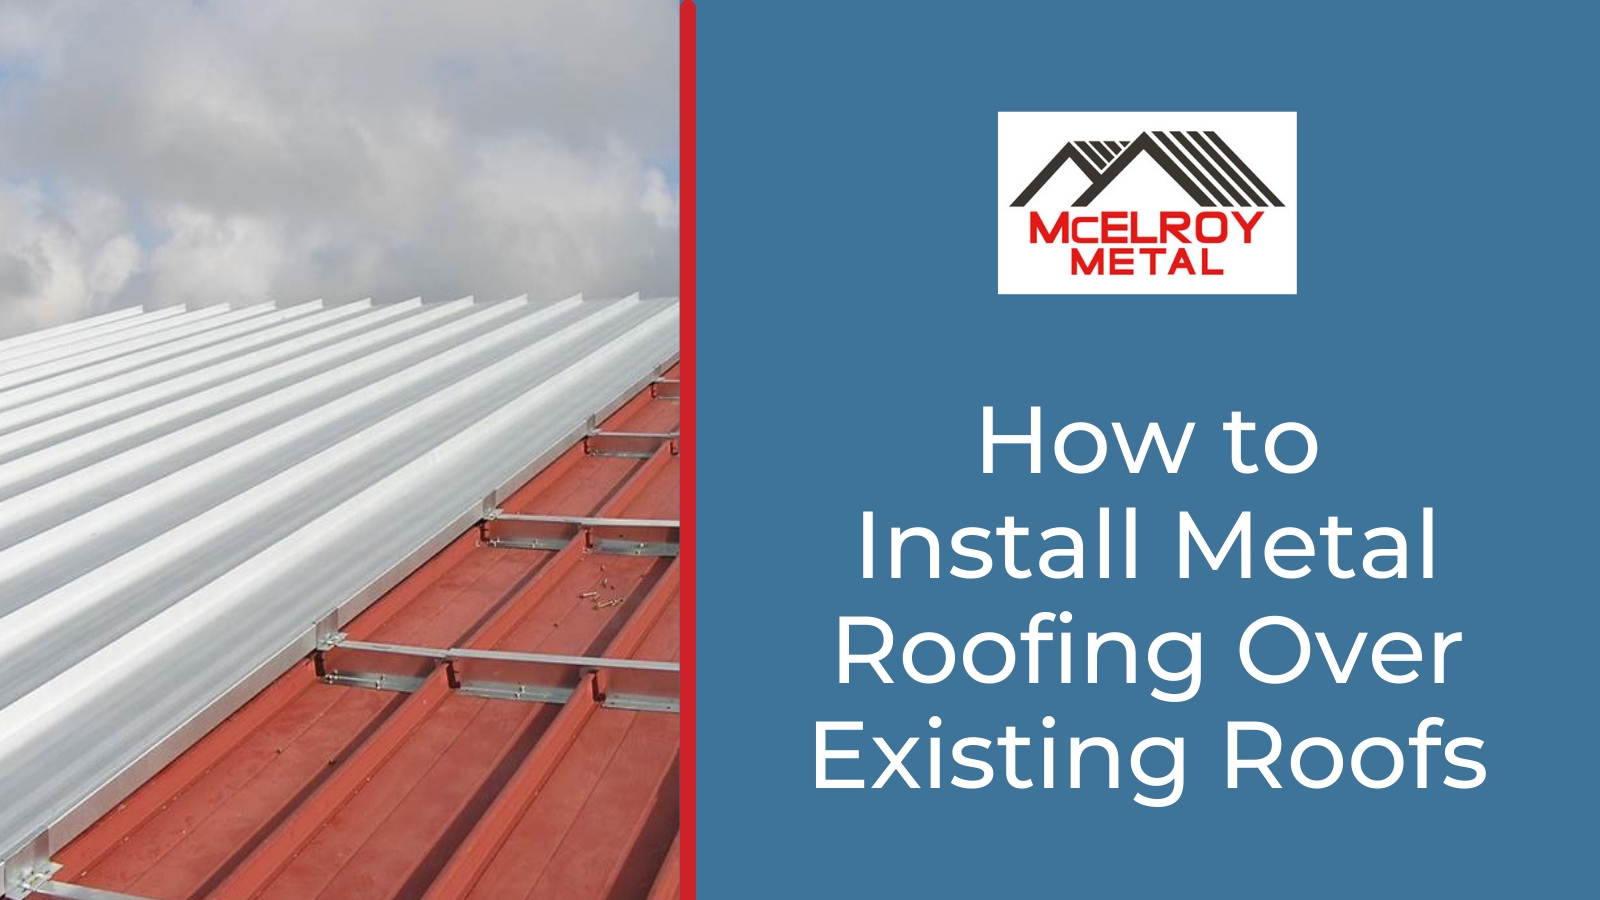 How to Install Metal Roofing Over Existing Metal Roofs